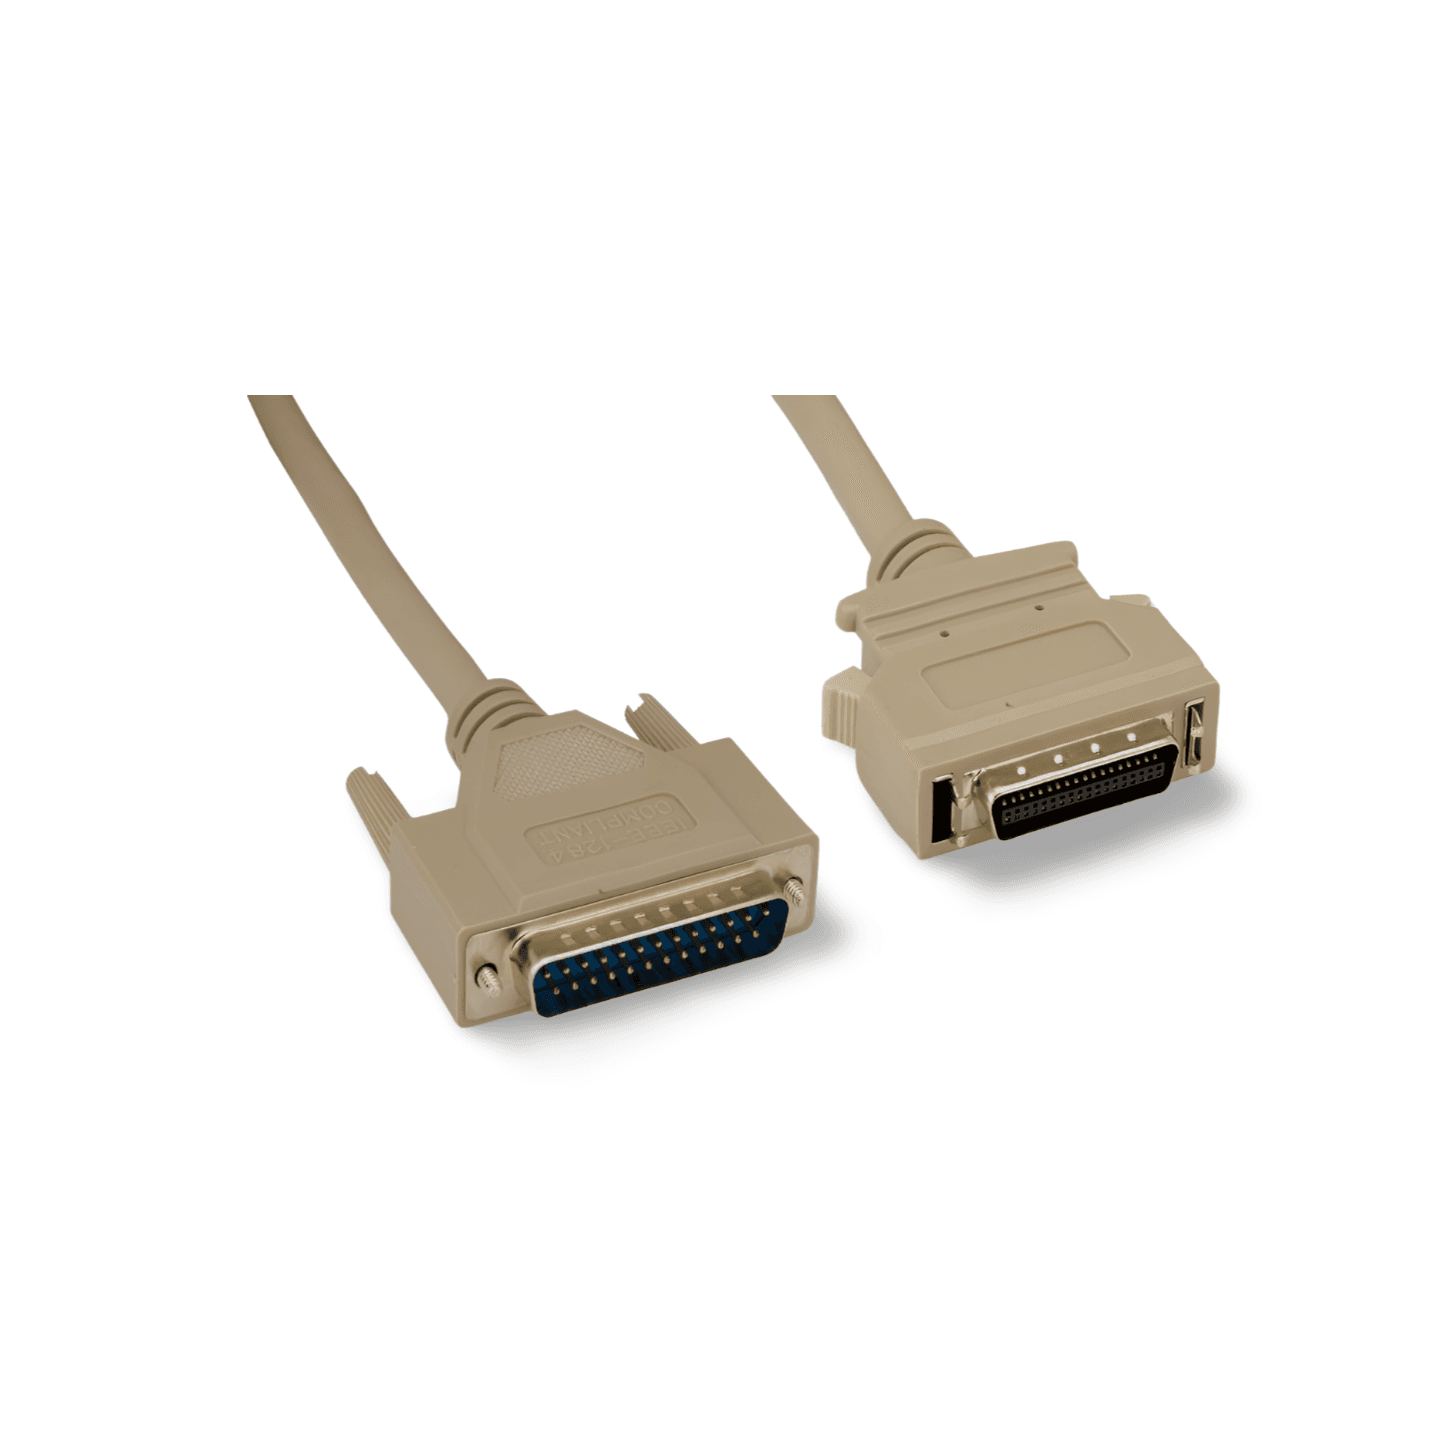 6ft Parallel Printer Cable IEEE 1284 A C DB25 Male to HPCN36 Male beige